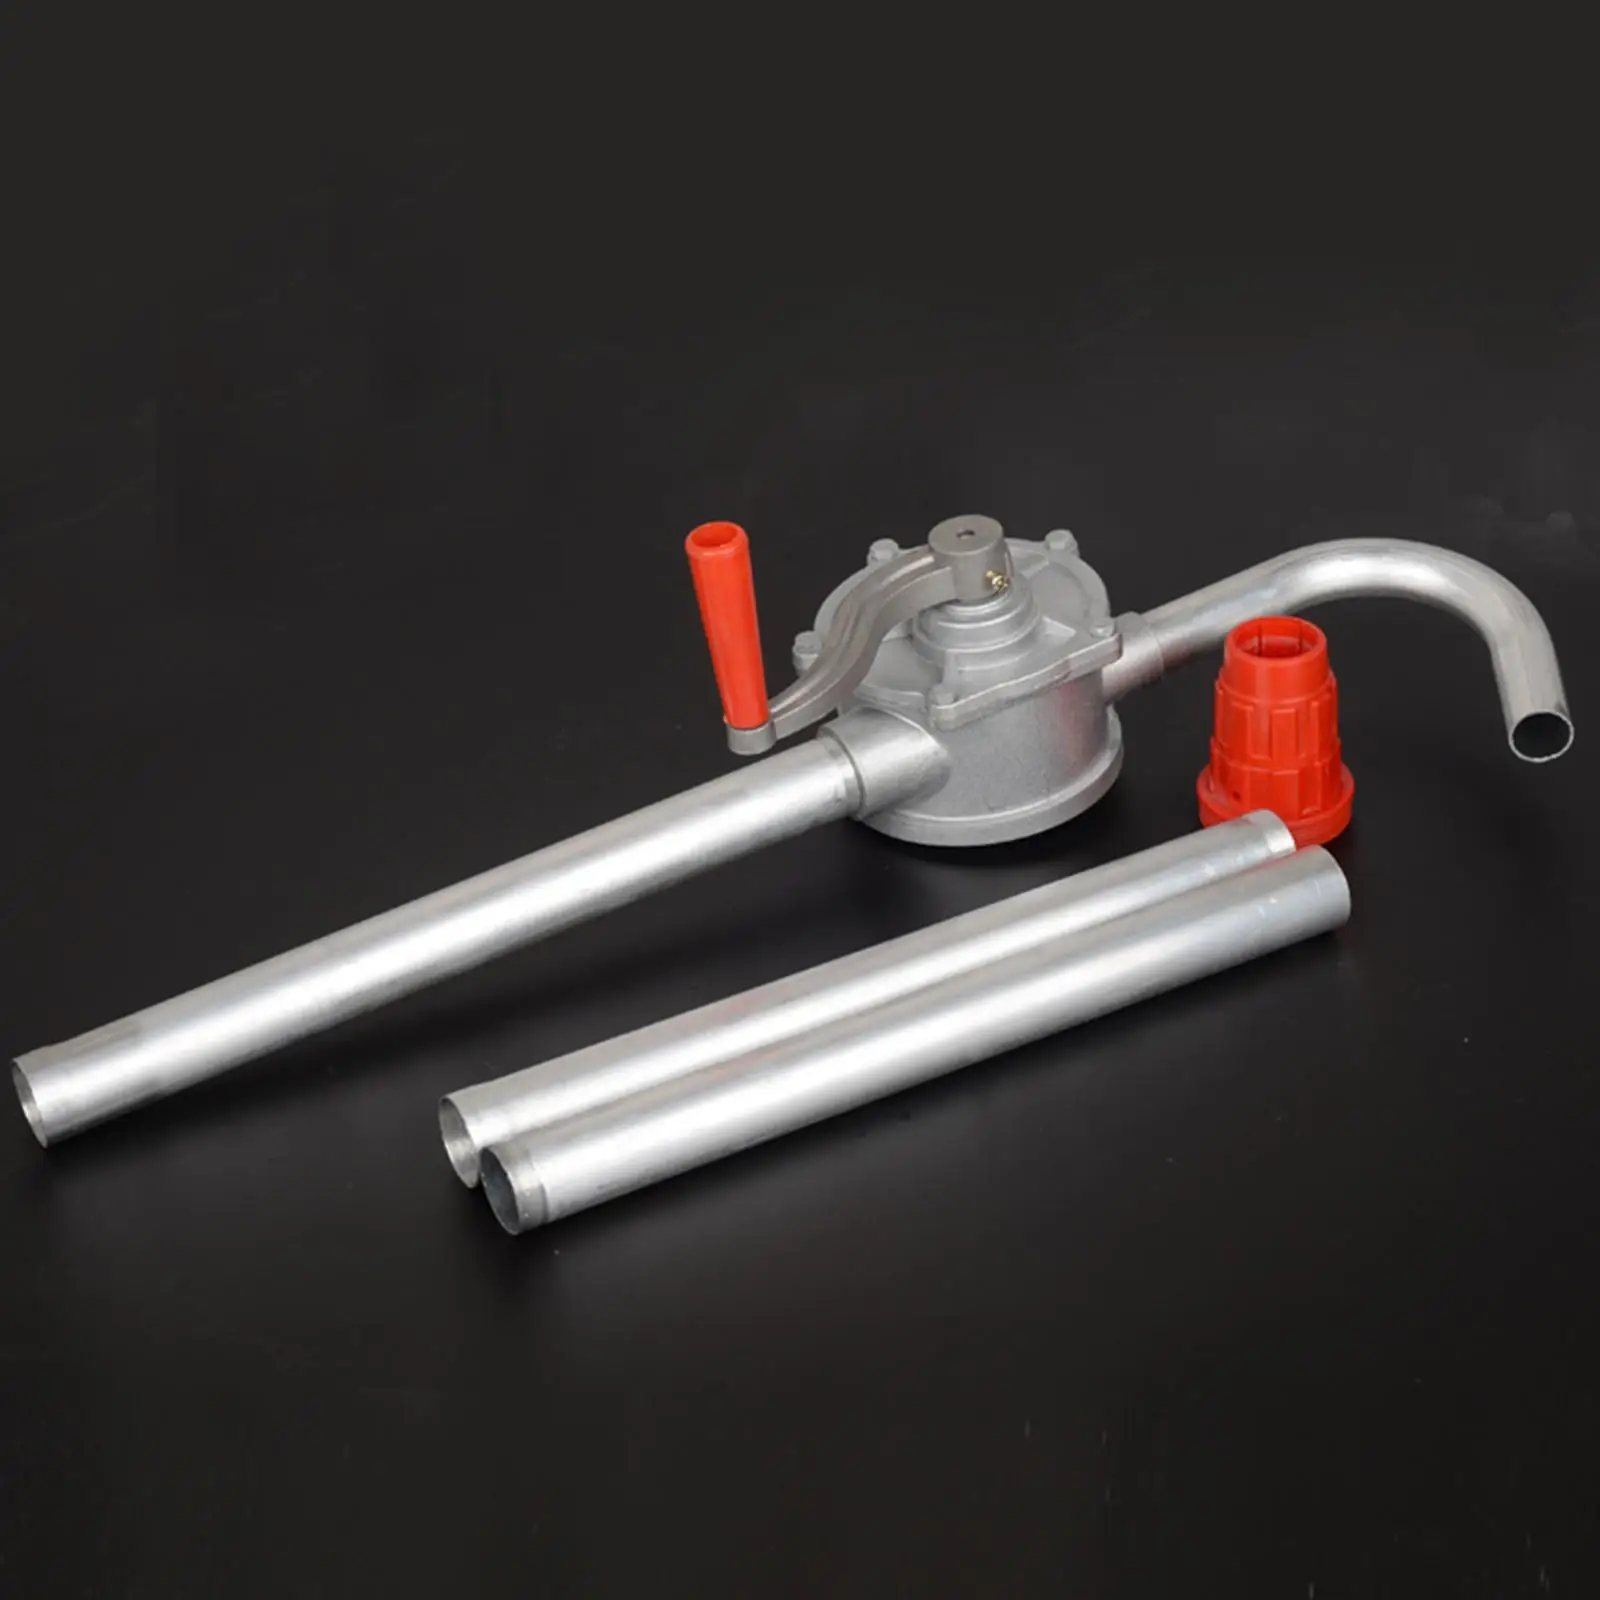 Hand Crank Oil Pump, Hand Rotary Fuel Pump, Manual Siphon Suction Hand Fuel Pumps for  Gasoline Petrol Engine Oil Fuel